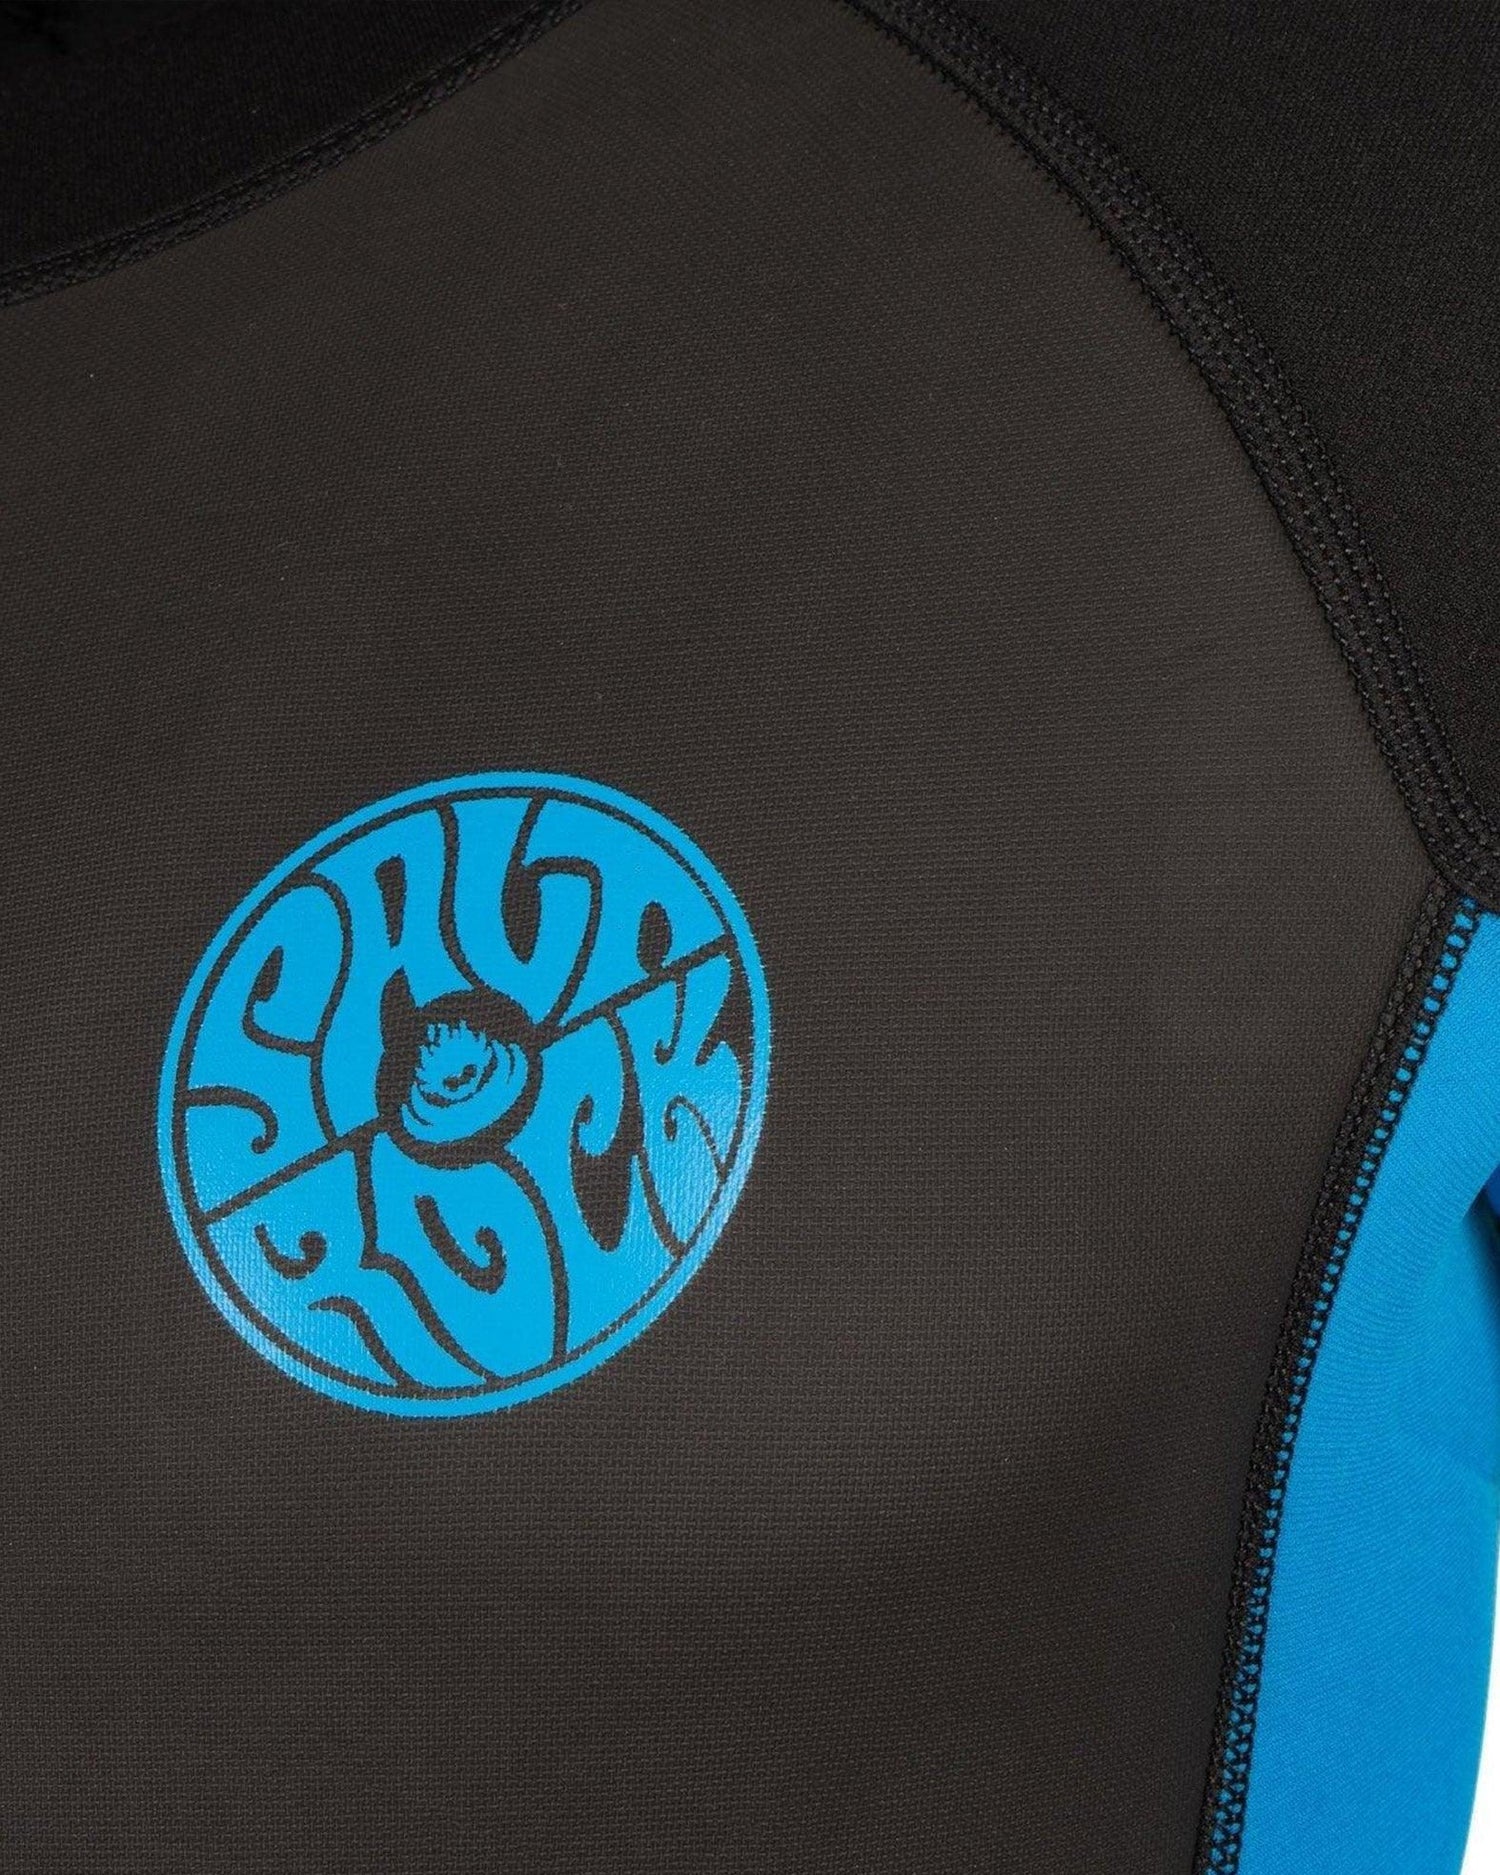 Close-up of a Saltrock Core - Men's 3/2 Shortie Wetsuit in Black/Blue with a circular blue logo featuring intricate white designs.